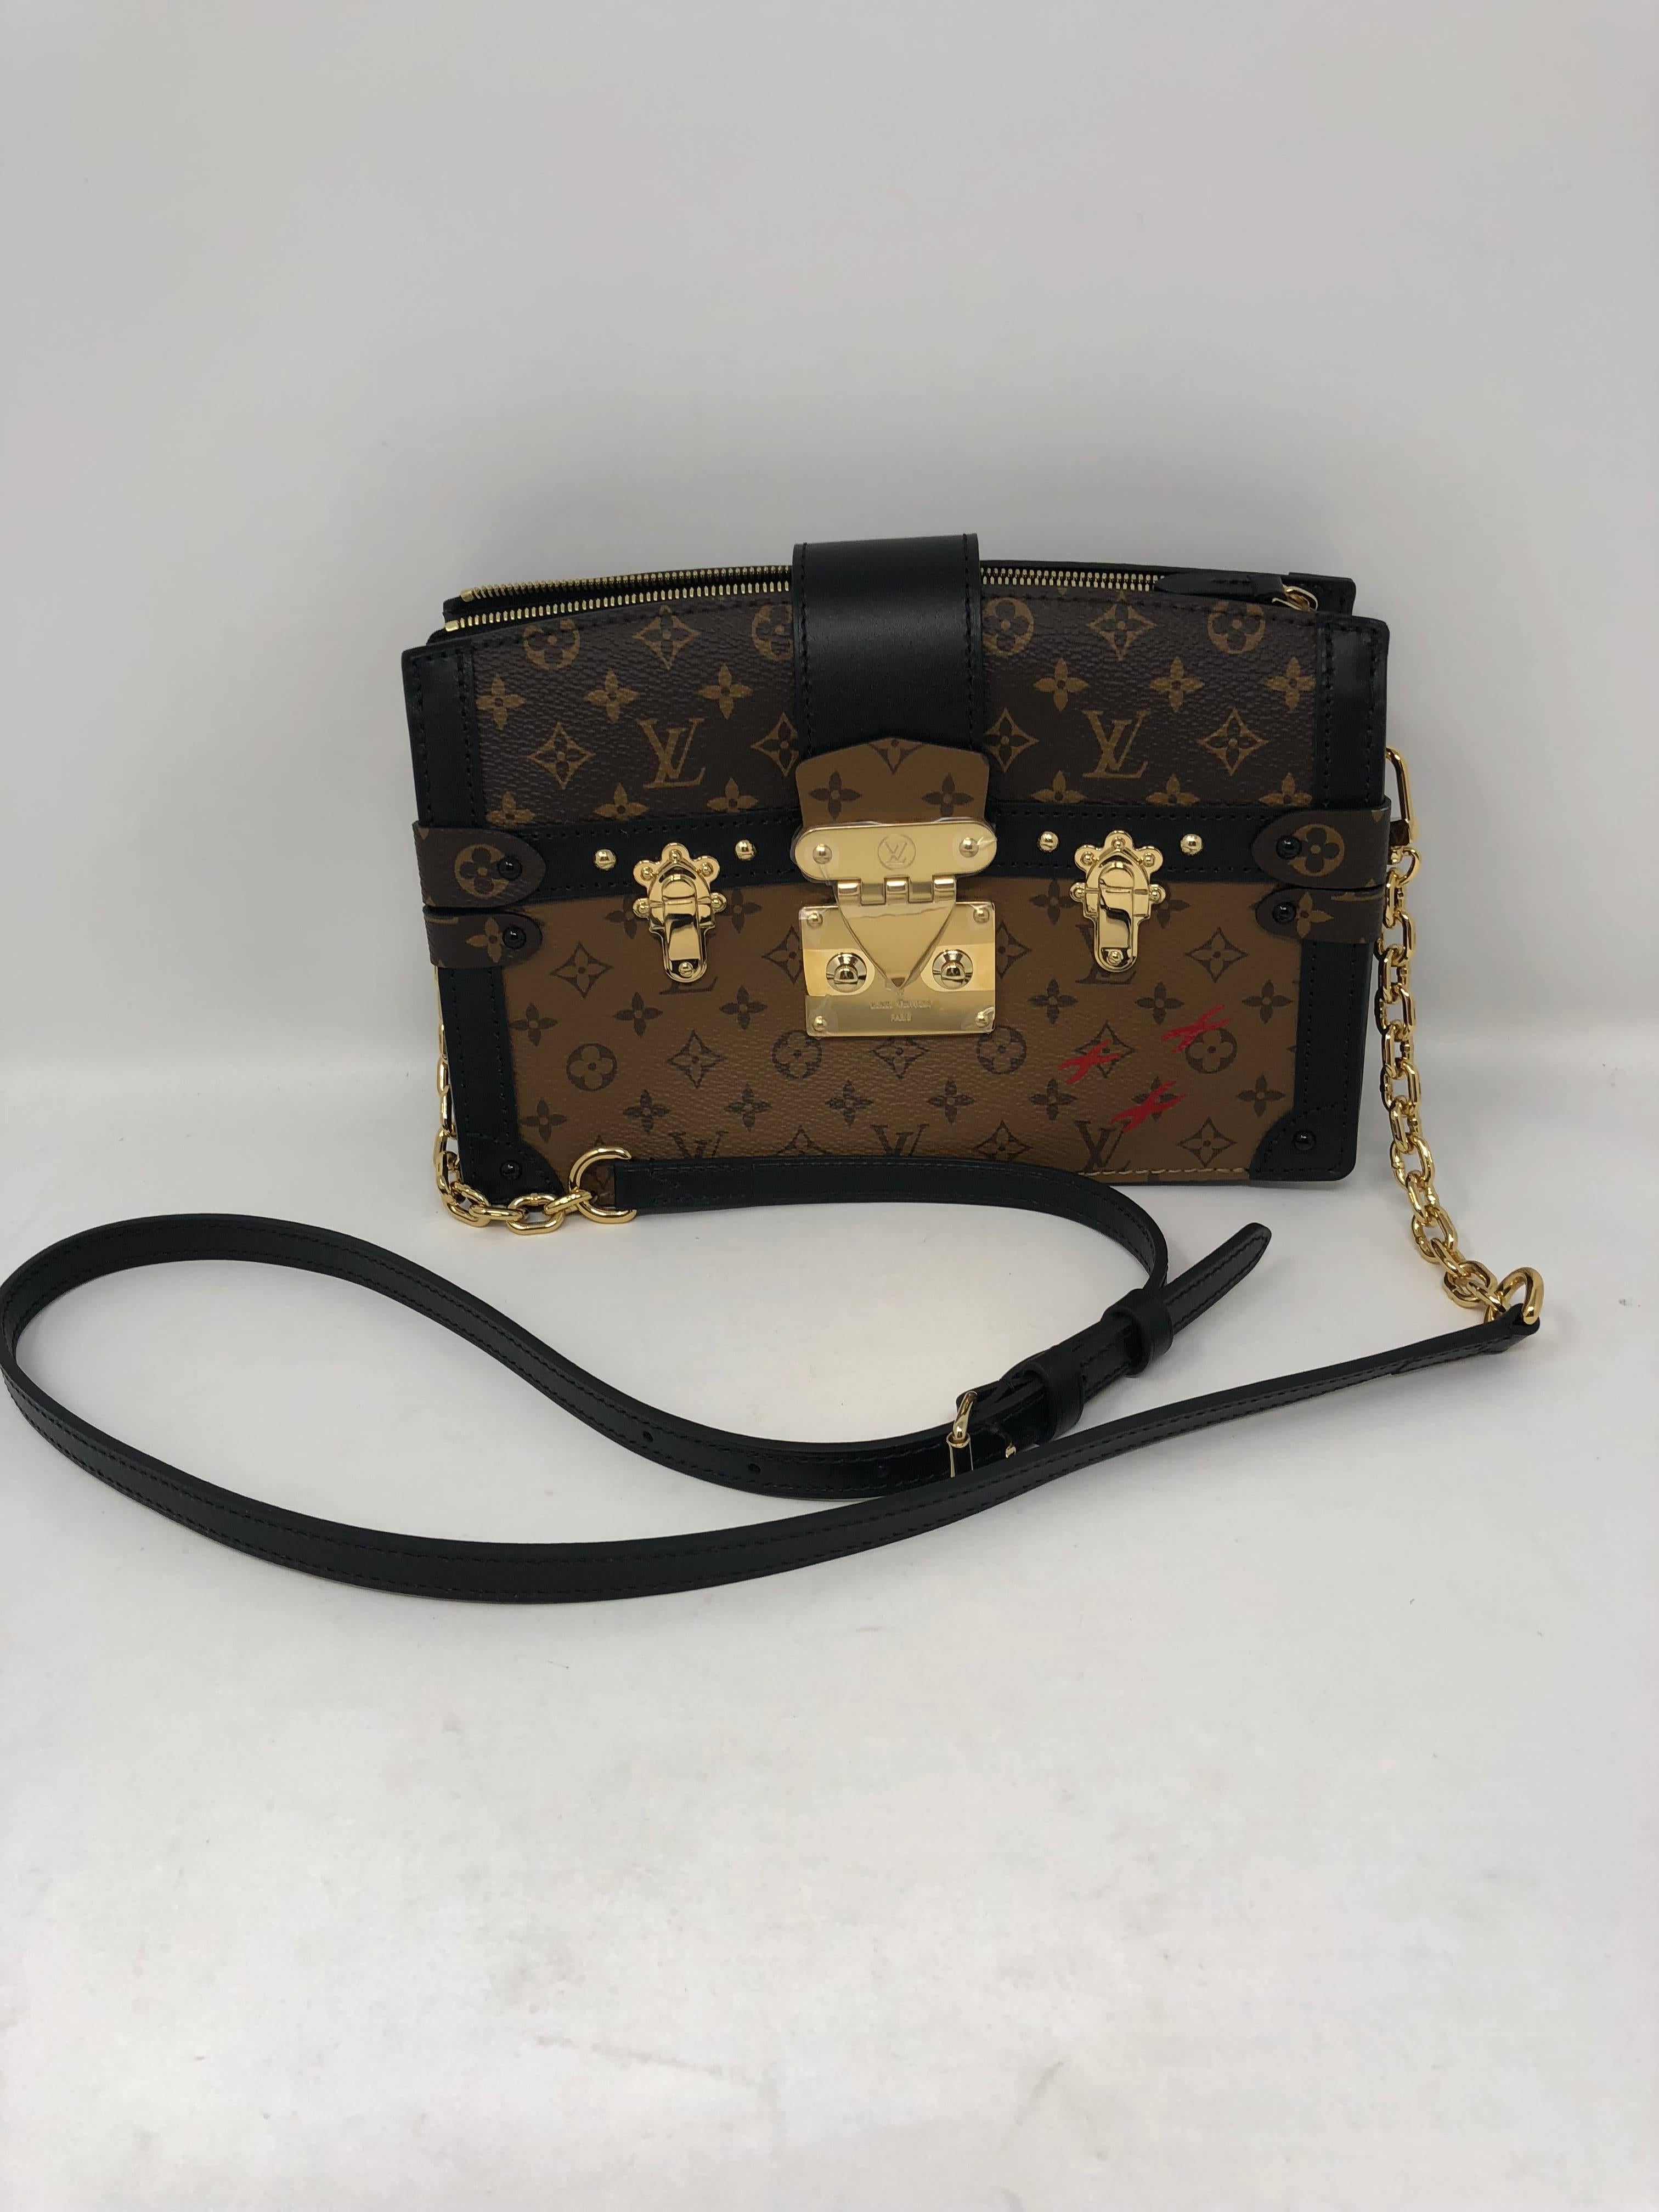 Limited edition Louis Vuitton Clutch and crossbody from Runway Collection Fall 2018. Special trunk collection in reverse monogram. The bag features the S-lock clasp and sheepskin interior leather with Malletage print. Highly coveted and brand new